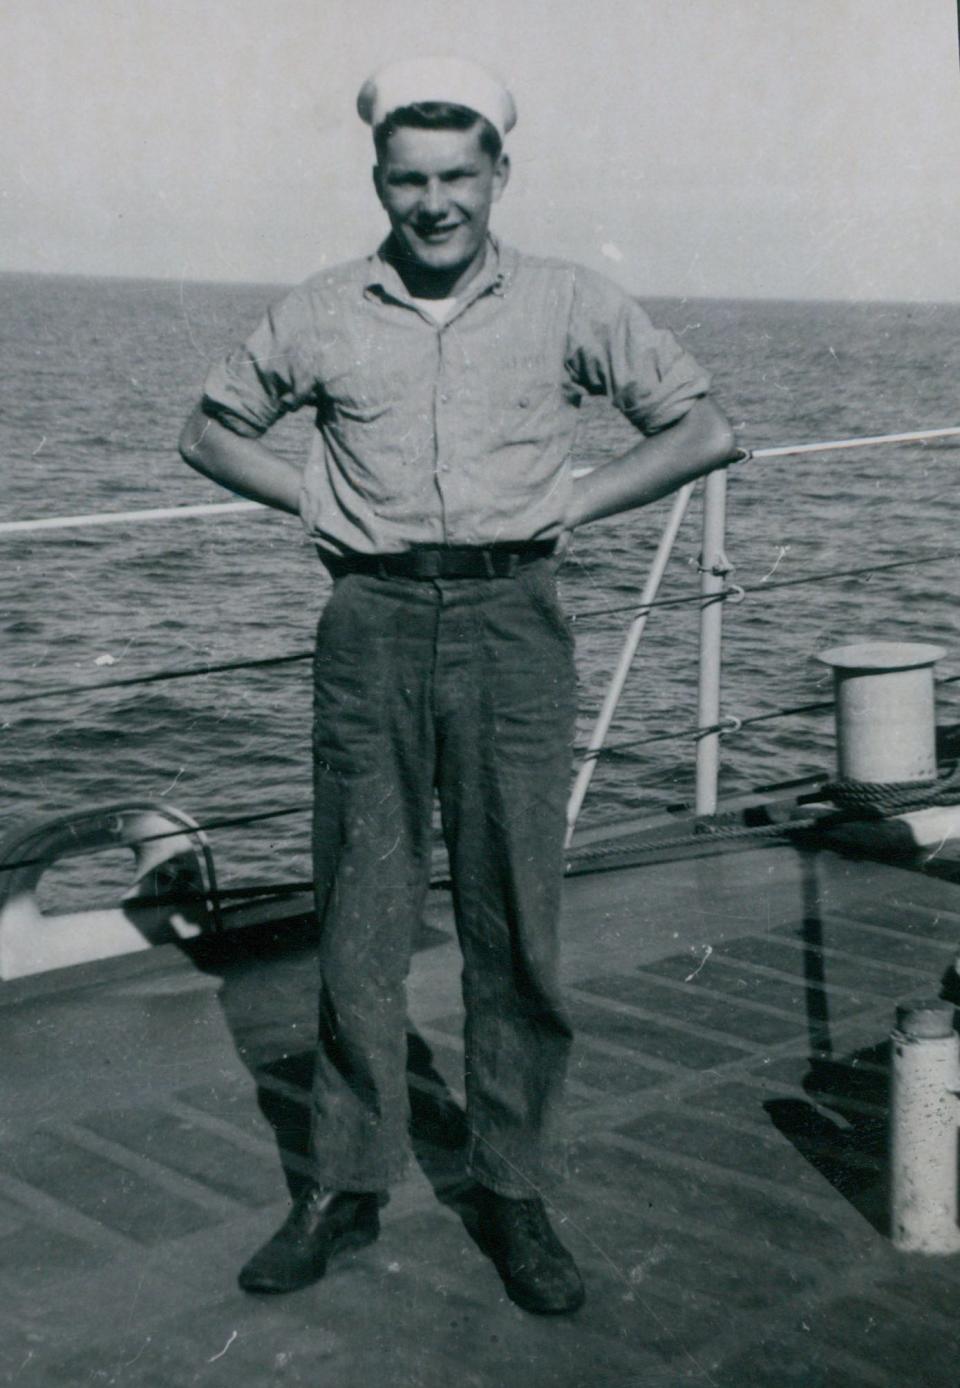 John Siko, now 90, served in the U.S. Navy from 1950-1953 and served on the USS Walker during the secret nuclear tests of Project Greenhouse in the Marshall Islands.